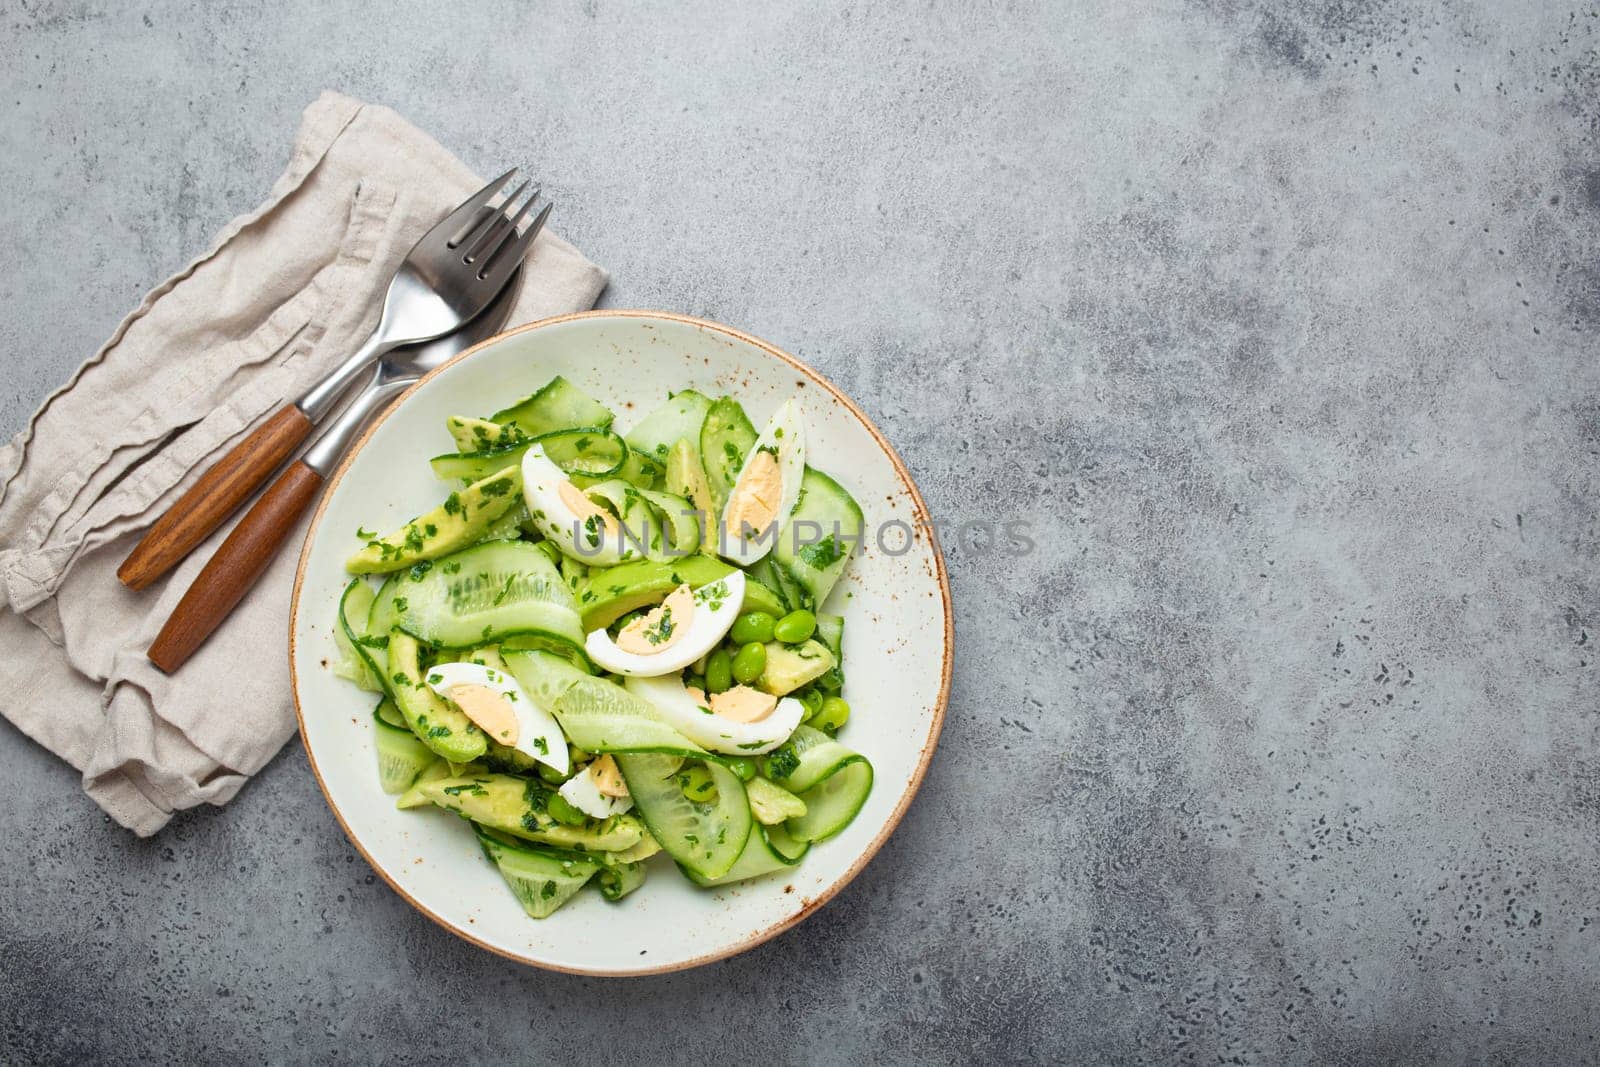 Healthy green avocado salad bowl with boiled eggs, sliced cucumbers, edamame beans, olive oil and herbs on ceramic plate top view, grey stone rustic table background. Copy space by its_al_dente